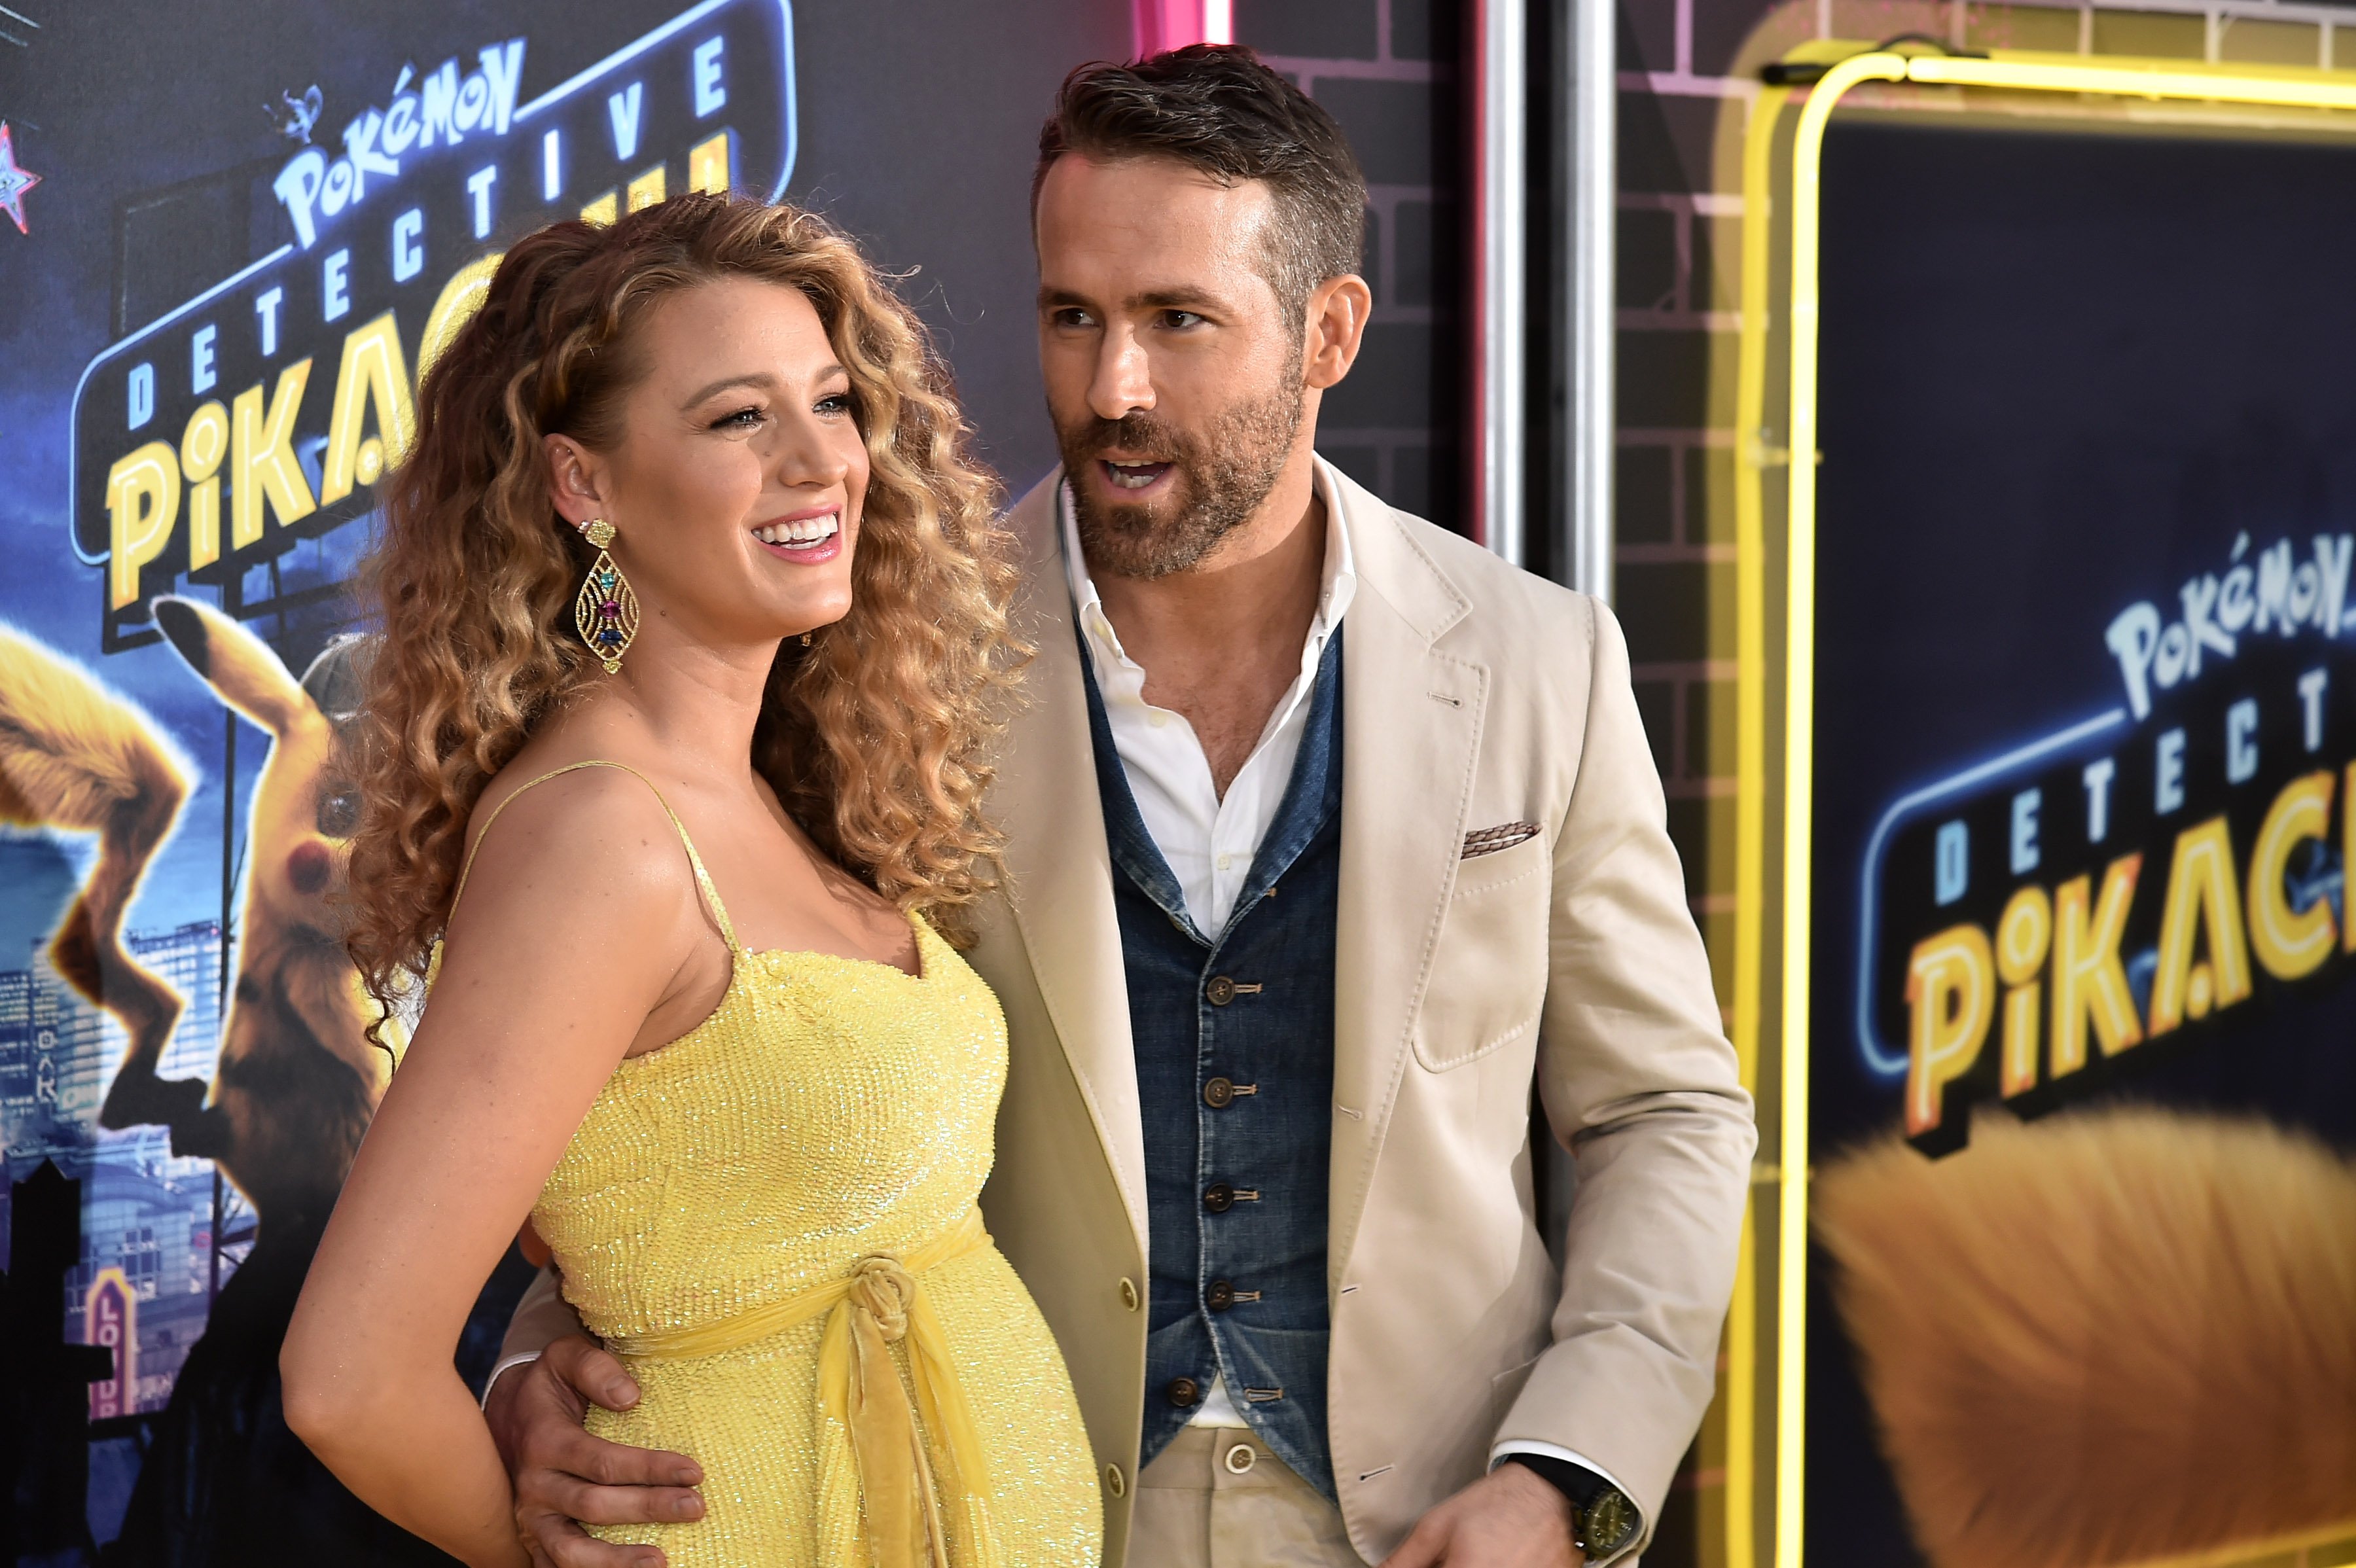 Blake Lively and Ryan Reynolds attend the premiere of "Pokemon Detective Pikachu" at Military Island in Times Square on May 2, 2019. | Source: Getty Images